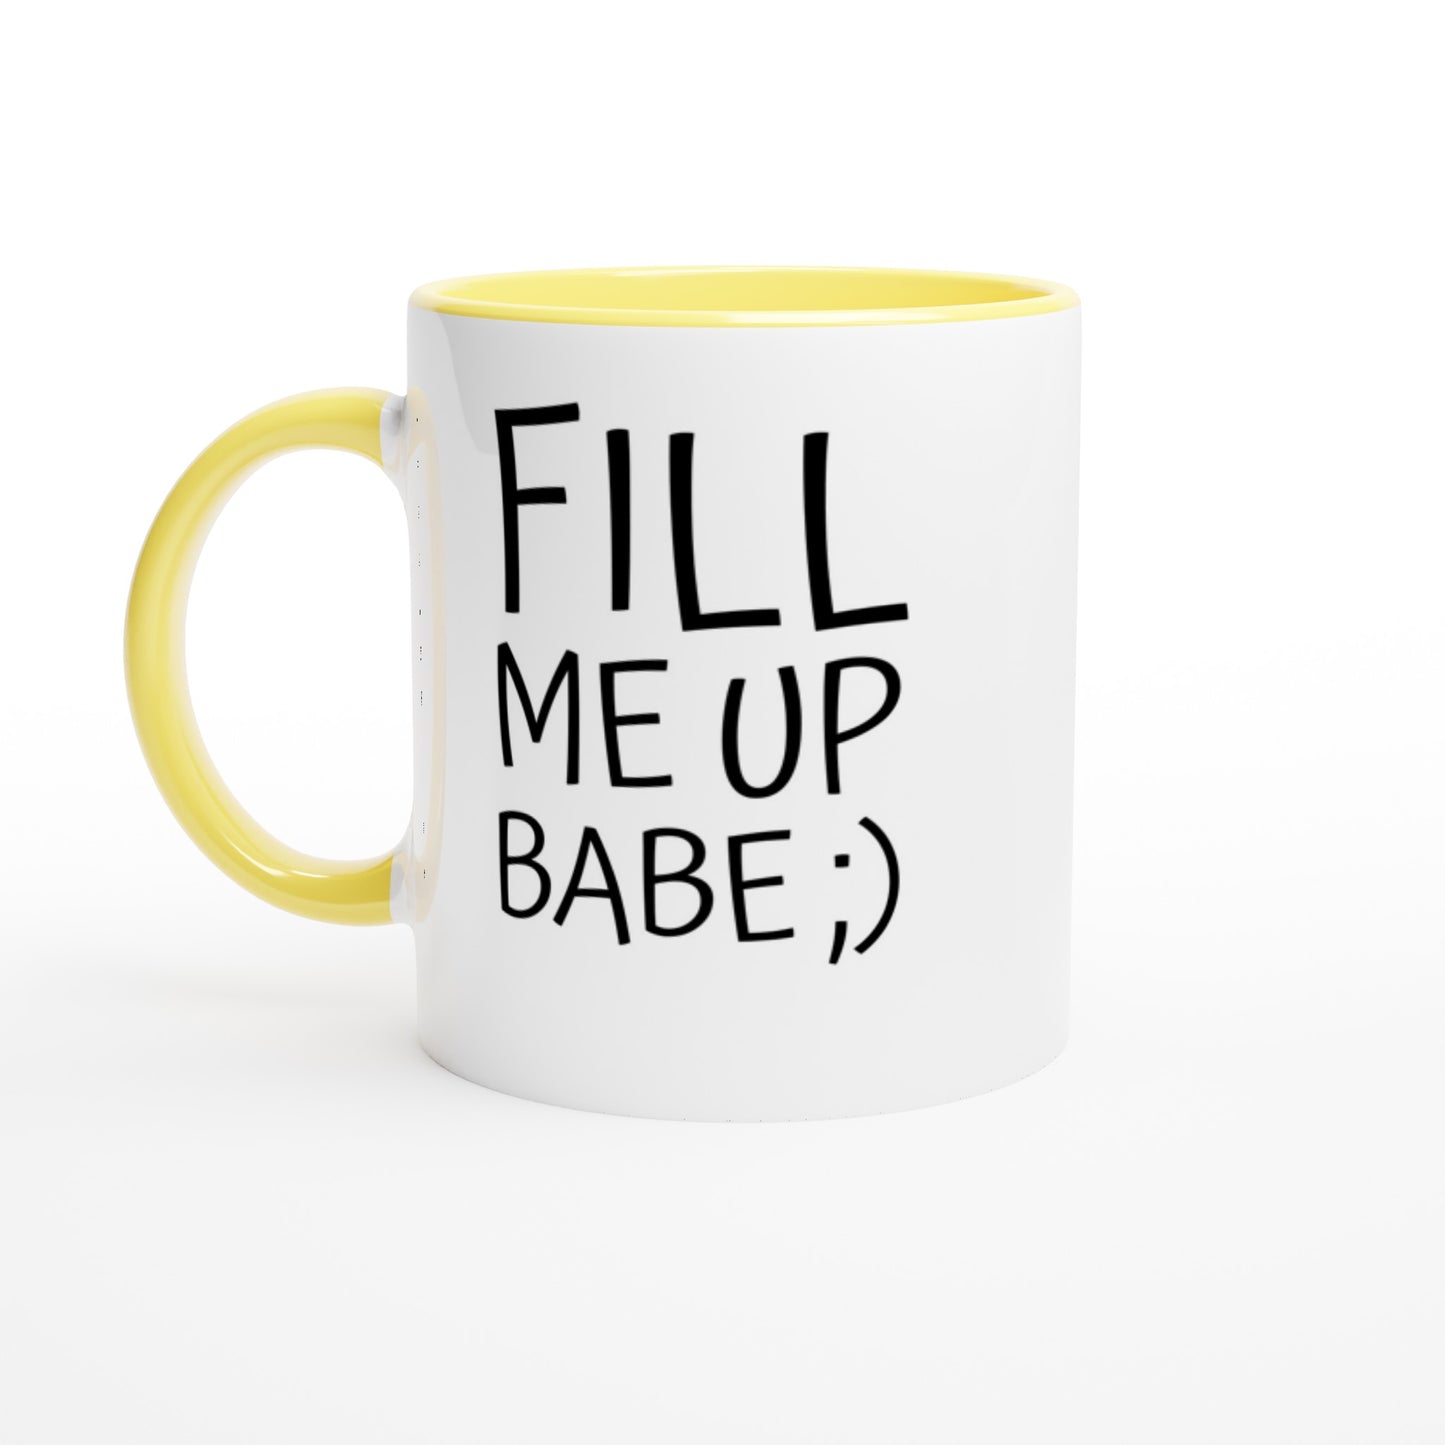 Fill Me Up Babe ;) - Colored